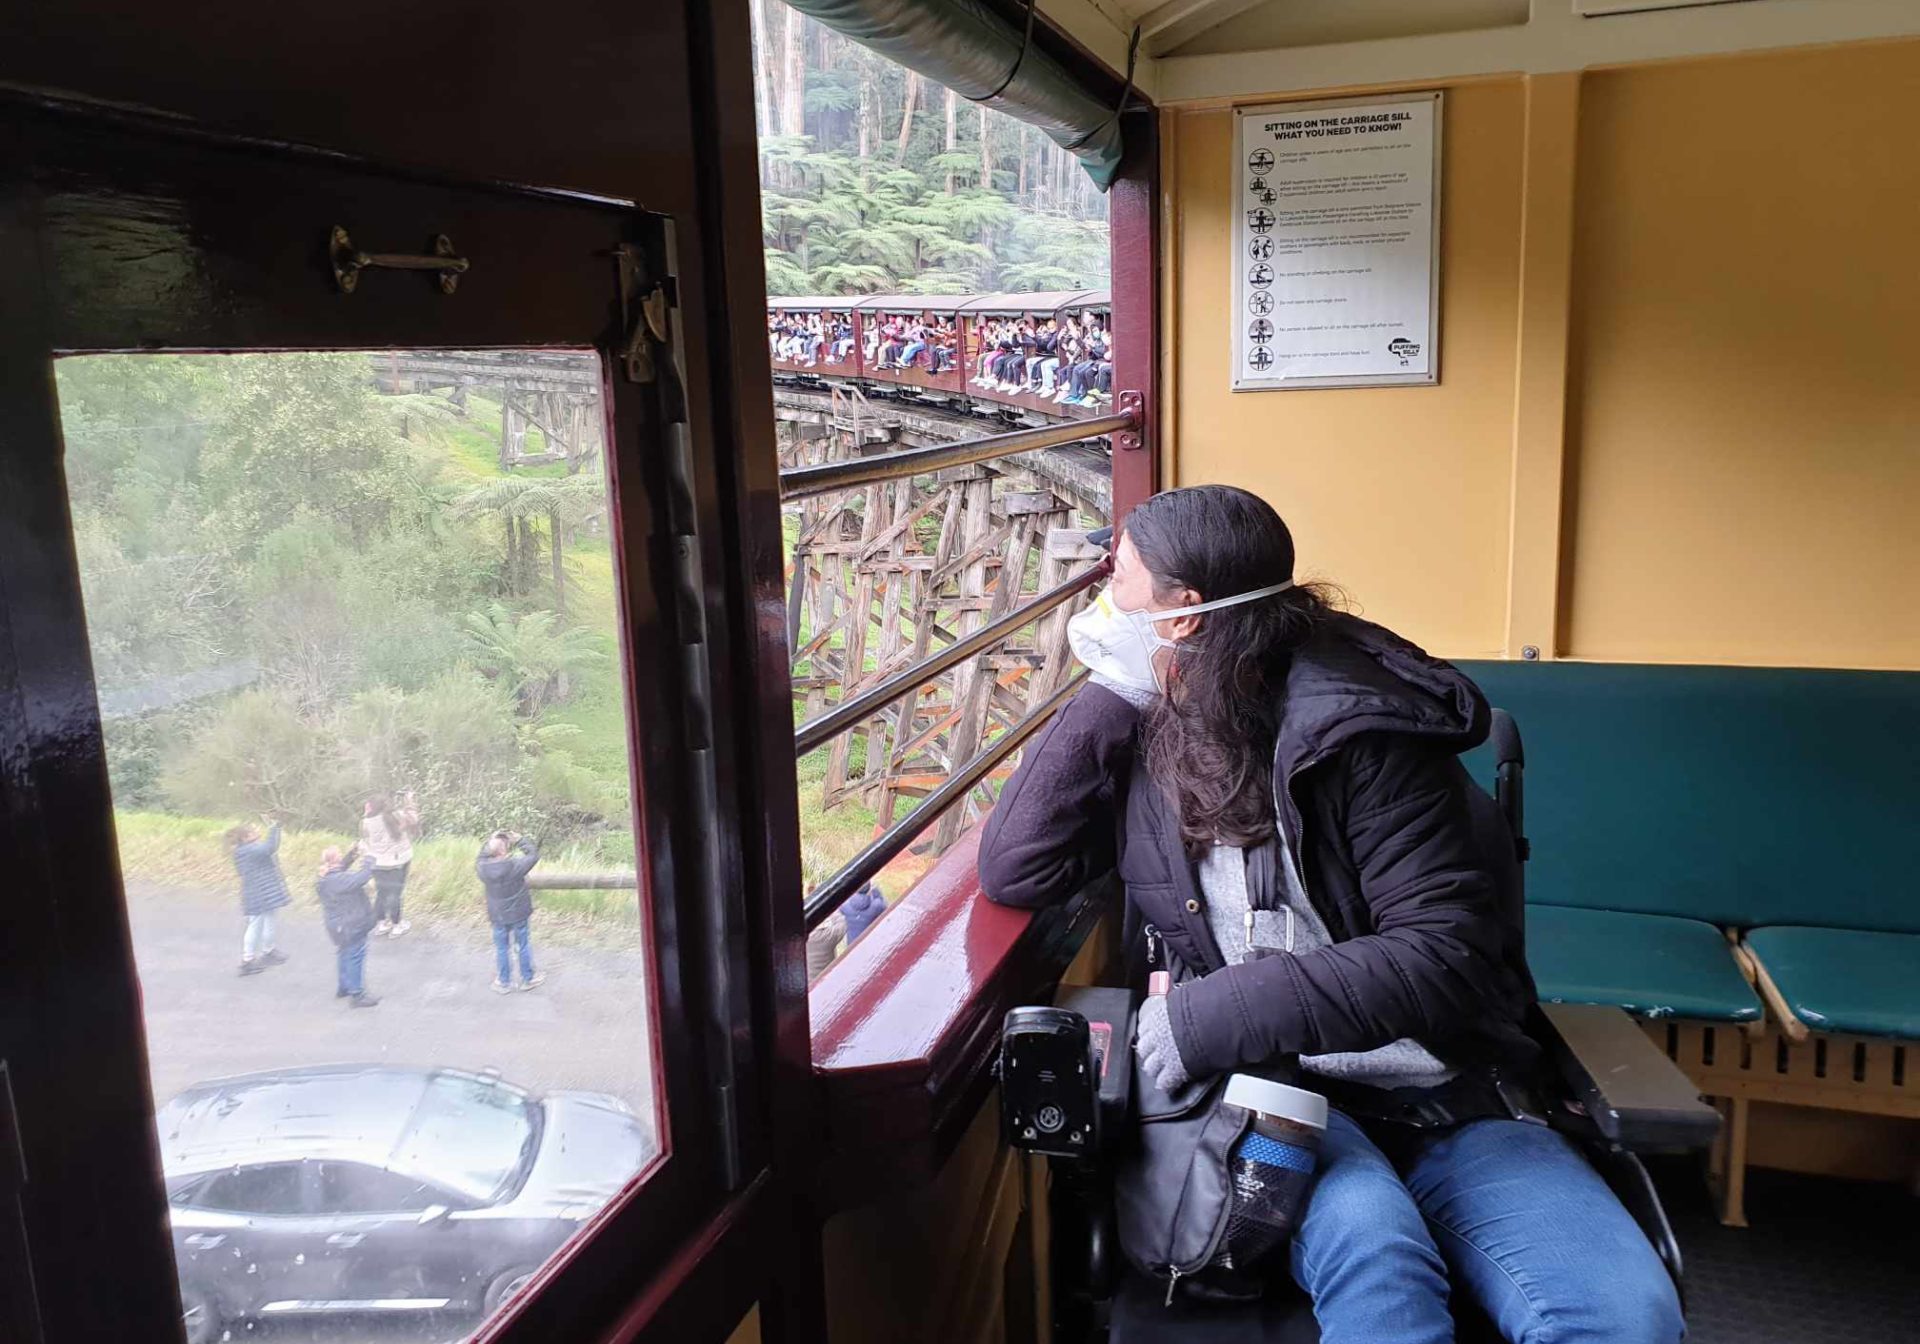 Young woman in a motorised wheelchair sits in one of Puffing Billy's accessible open side carriages. The train is travelling over a trestle bridge and green ferns can be seen outside. The young woman has warm clothes on and is wearing a face mask, and it looking out at the scenery.